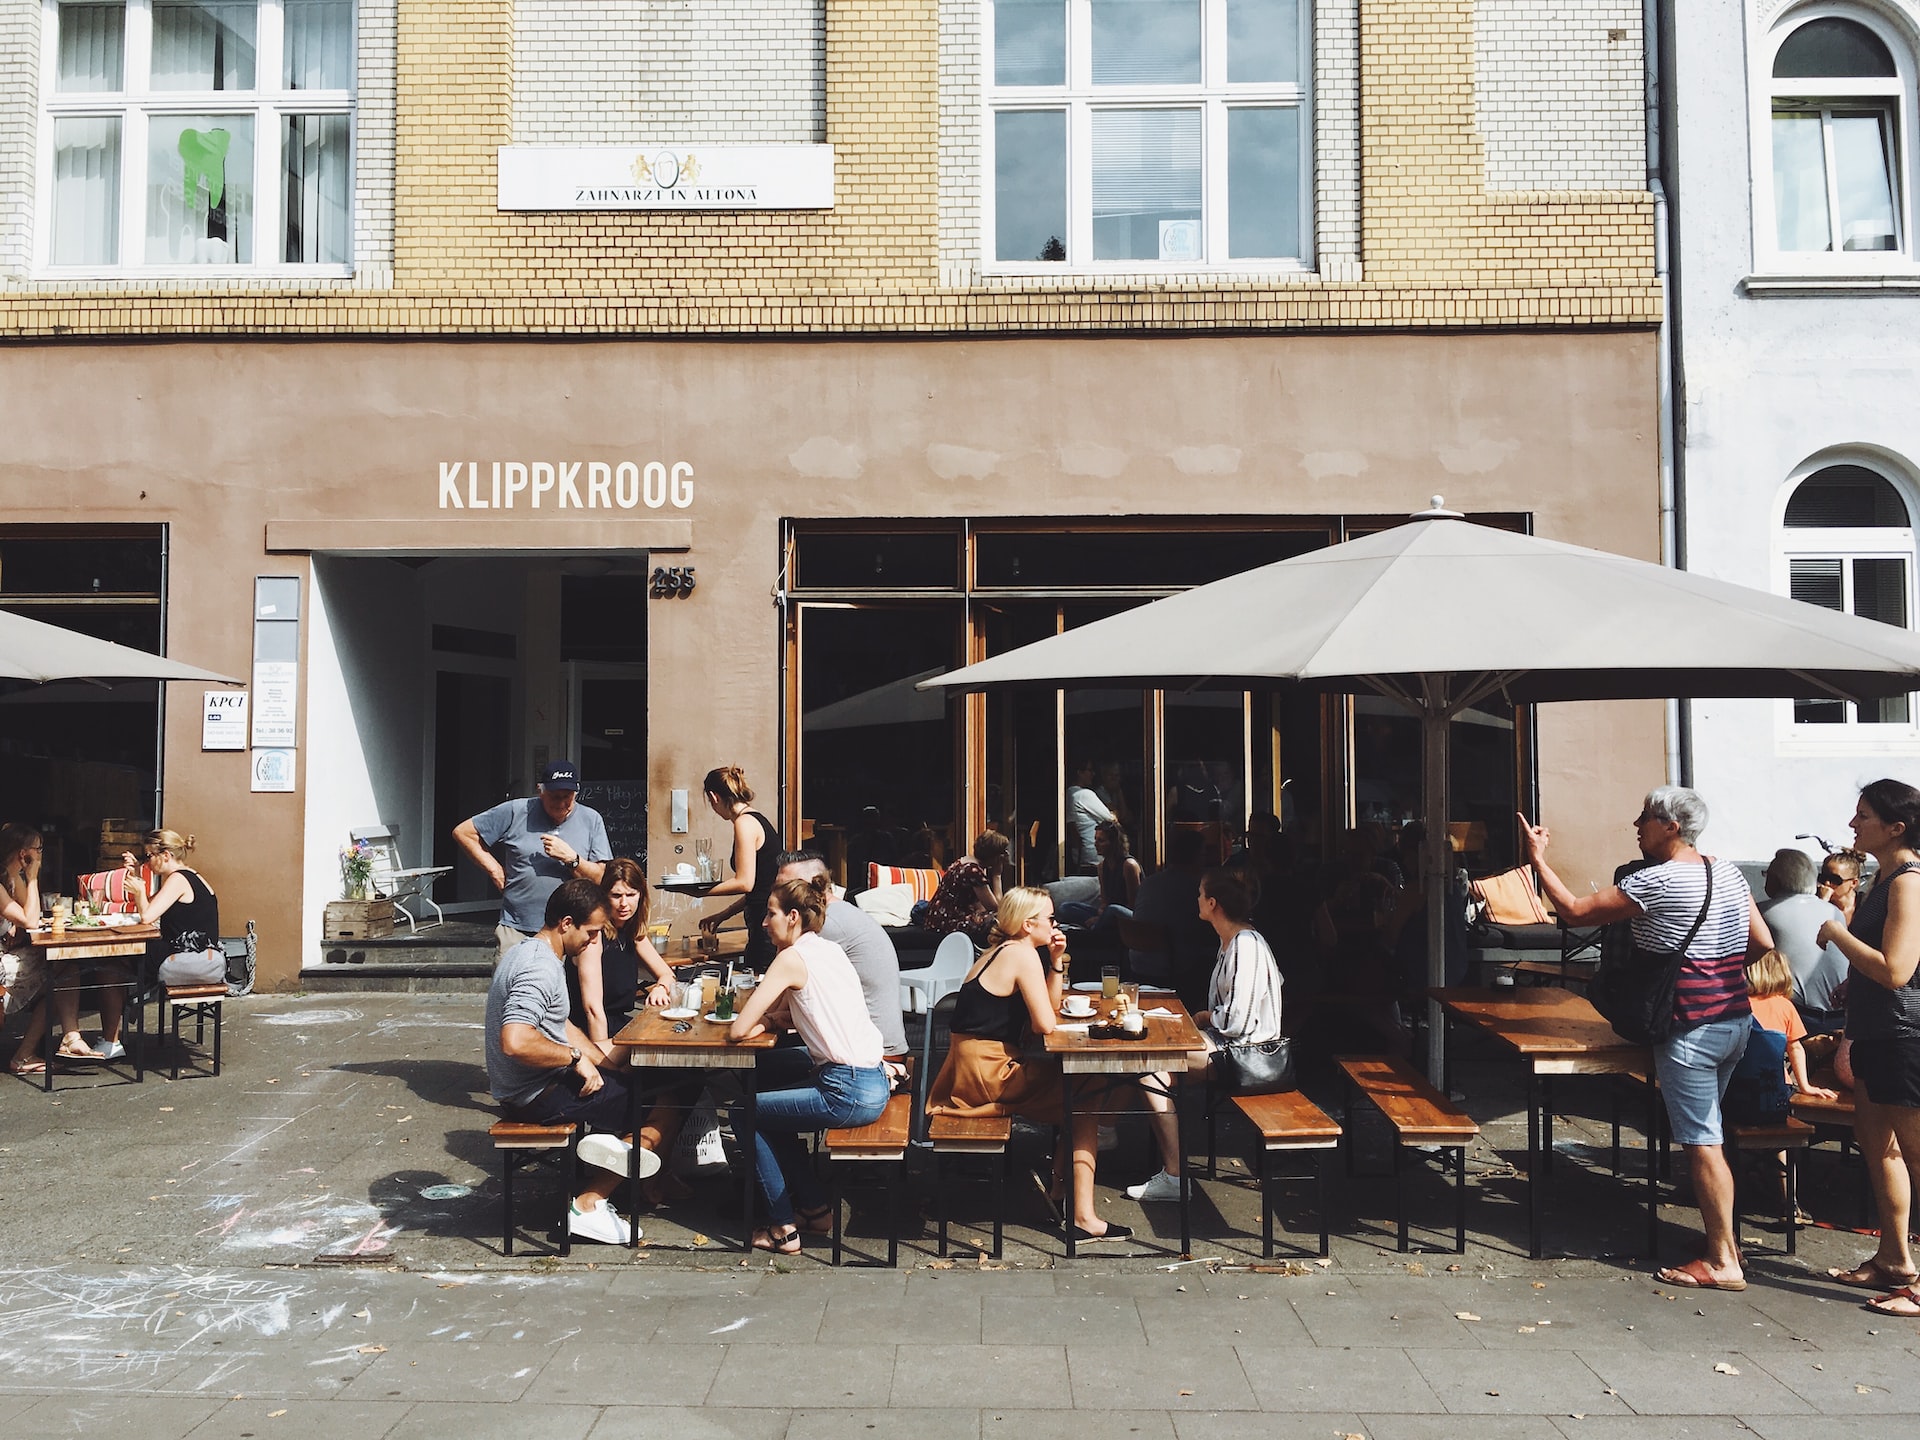 People sitting outside of a coffee shop in Germany.